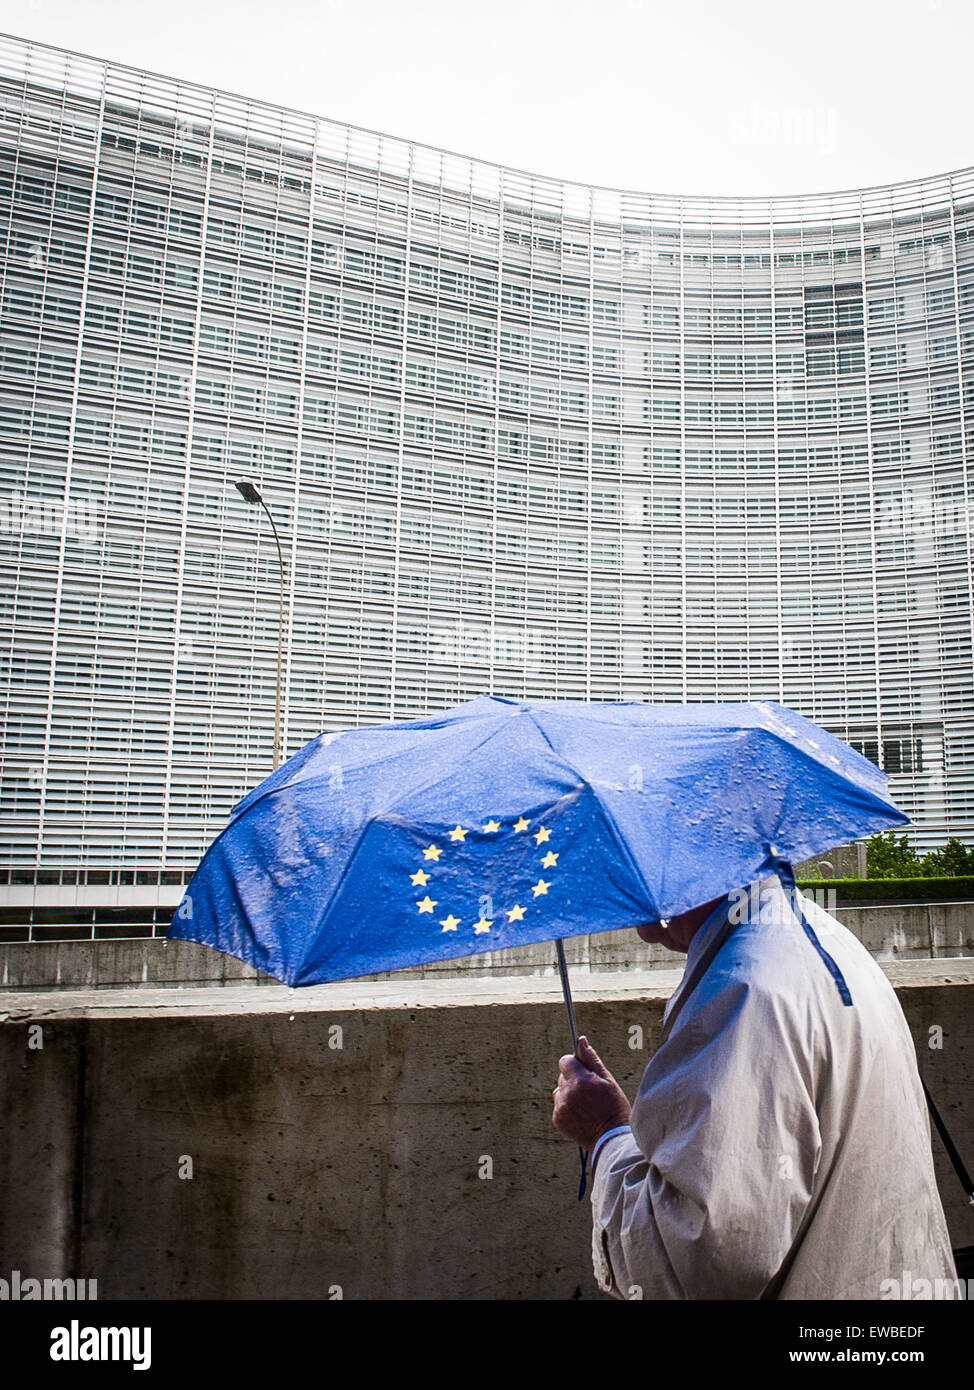 Brussels, Bxl, Belgium. 22nd June, 2015. Pedestrian under umbrella with European Union flag is walking along European Commission headquarters building in Brussels, Belgium on 22.06.2015 Heads of Eurozone state will geather for emergency summit on Greek debt today in EU headquarters by Wiktor Dabkowski © Wiktor Dabkowski/ZUMA Wire/Alamy Live News Stock Photo